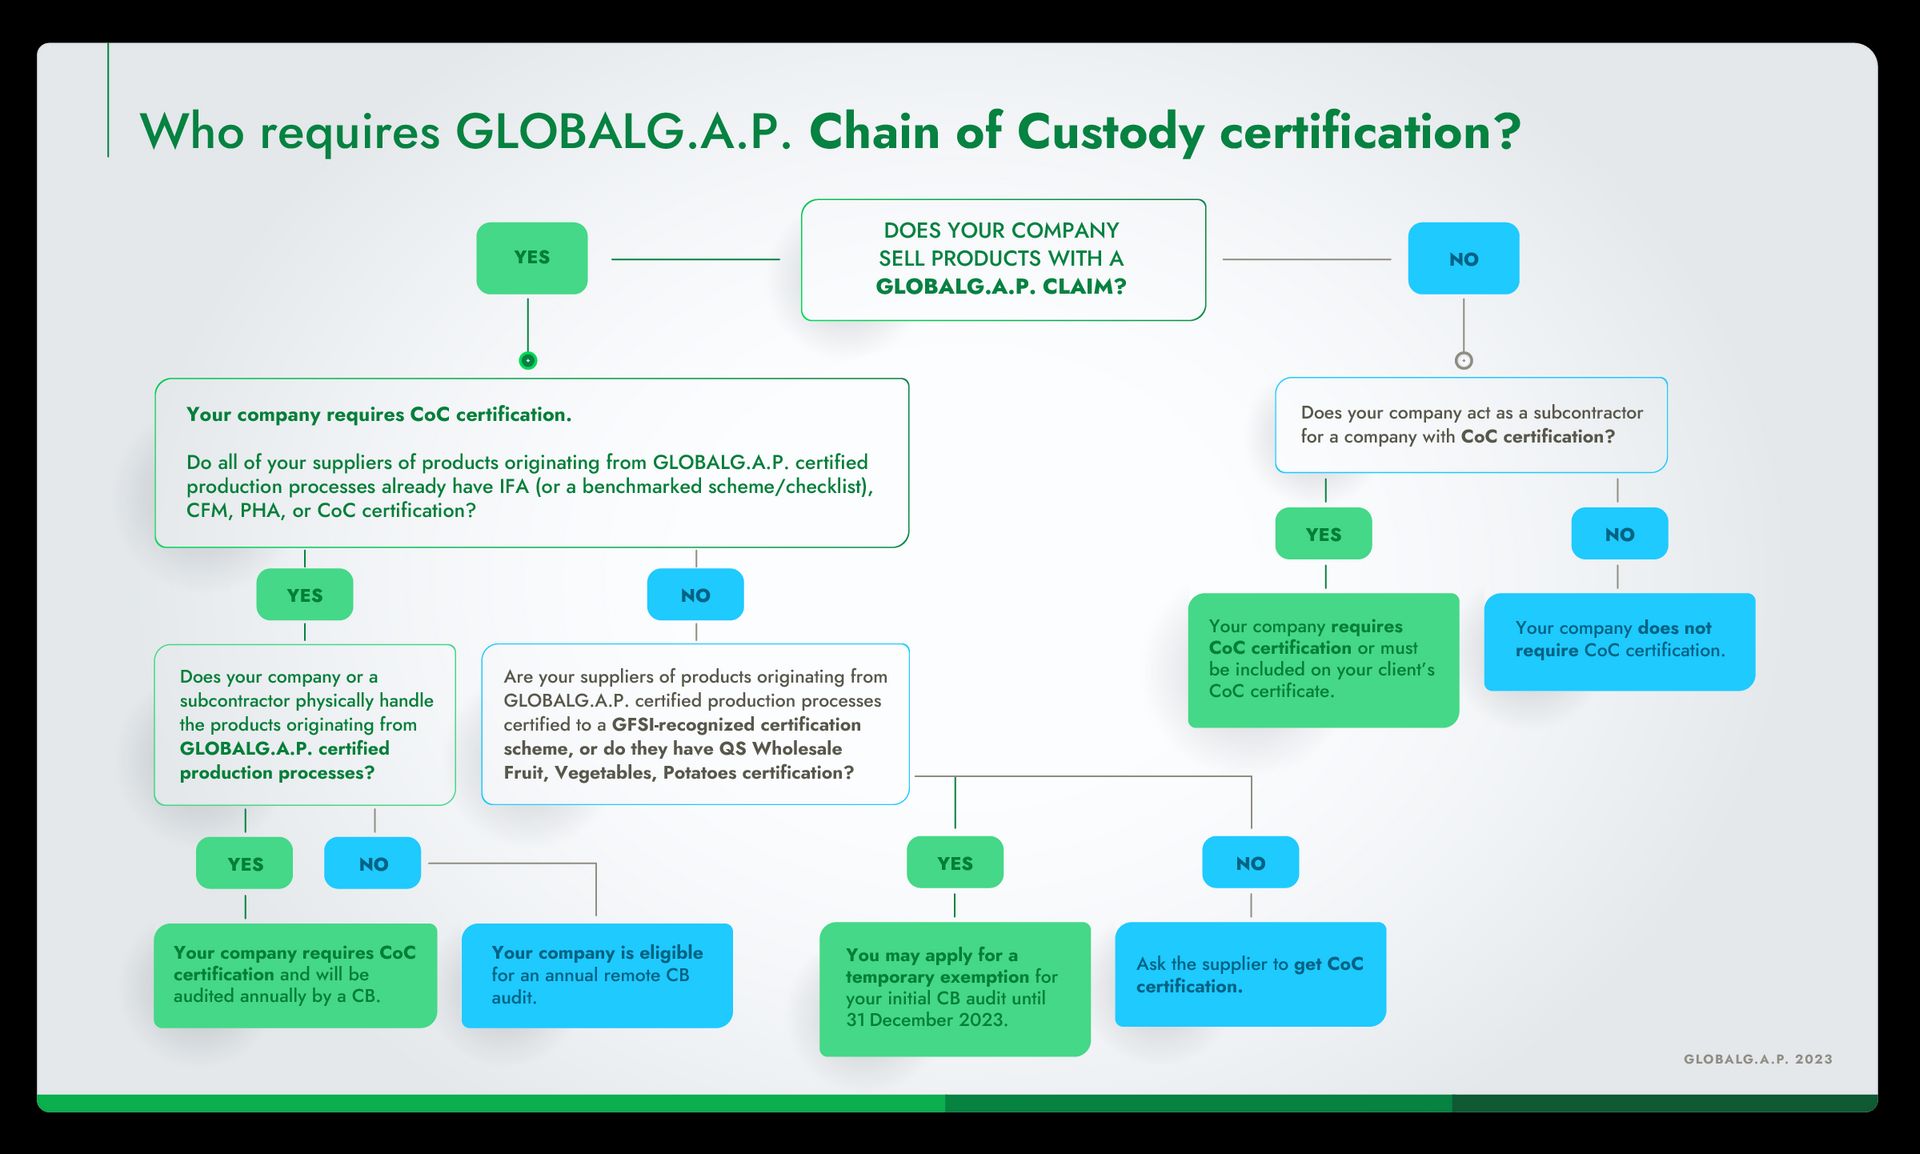 Infographic showing which supply chain stakeholders require GLOBALG.A.P. Chain of Custody certification 